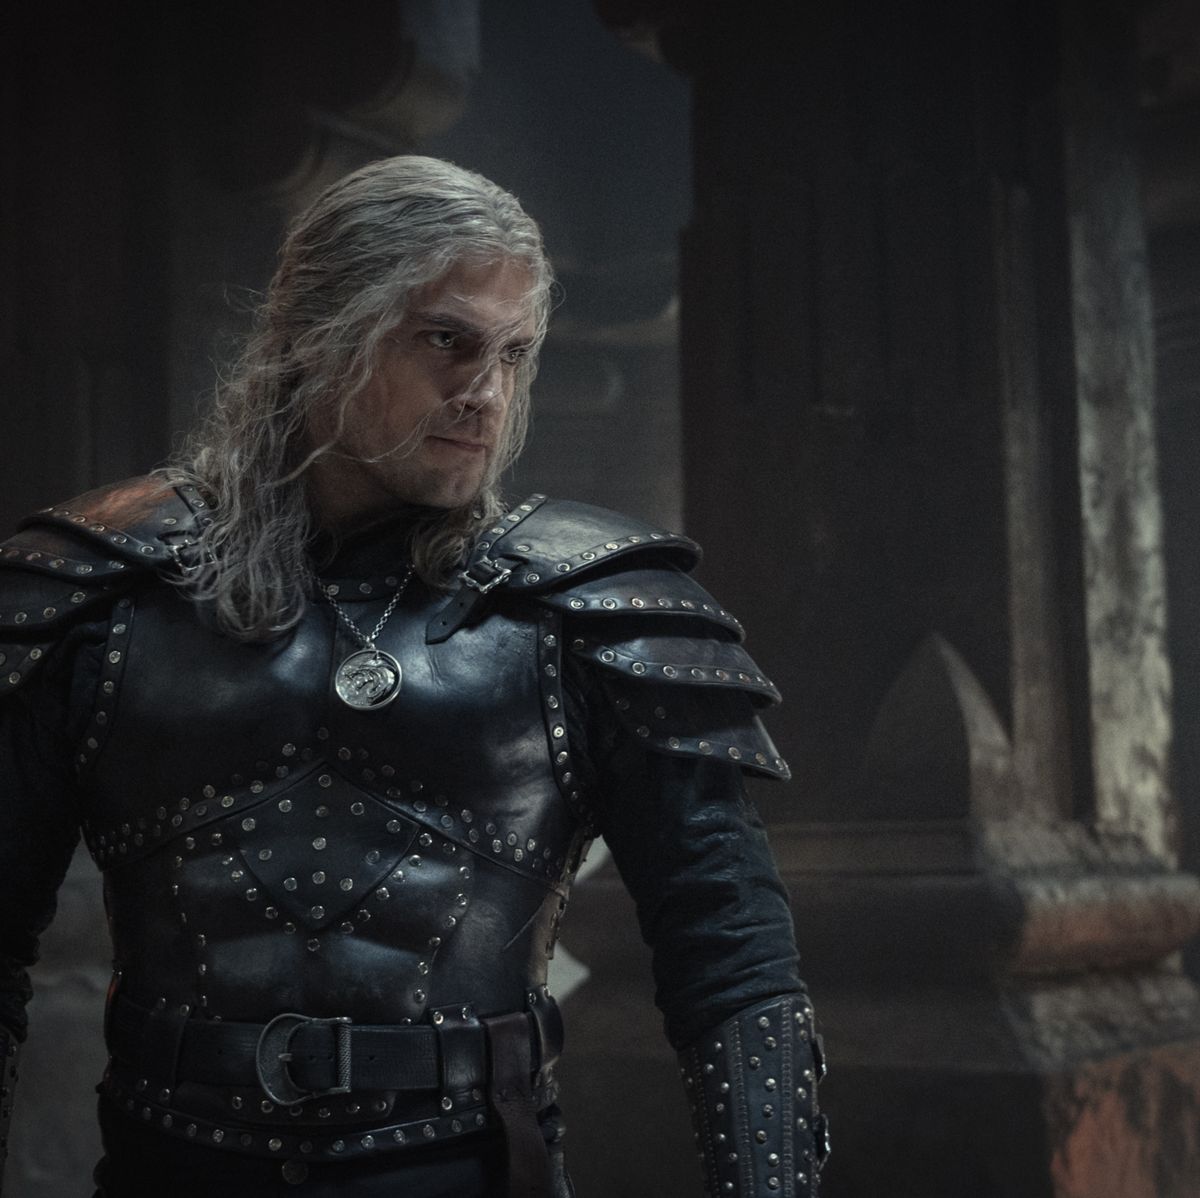 The Witcher Season 3 Trailer: Breakdown, Small Details, And Big Reveals